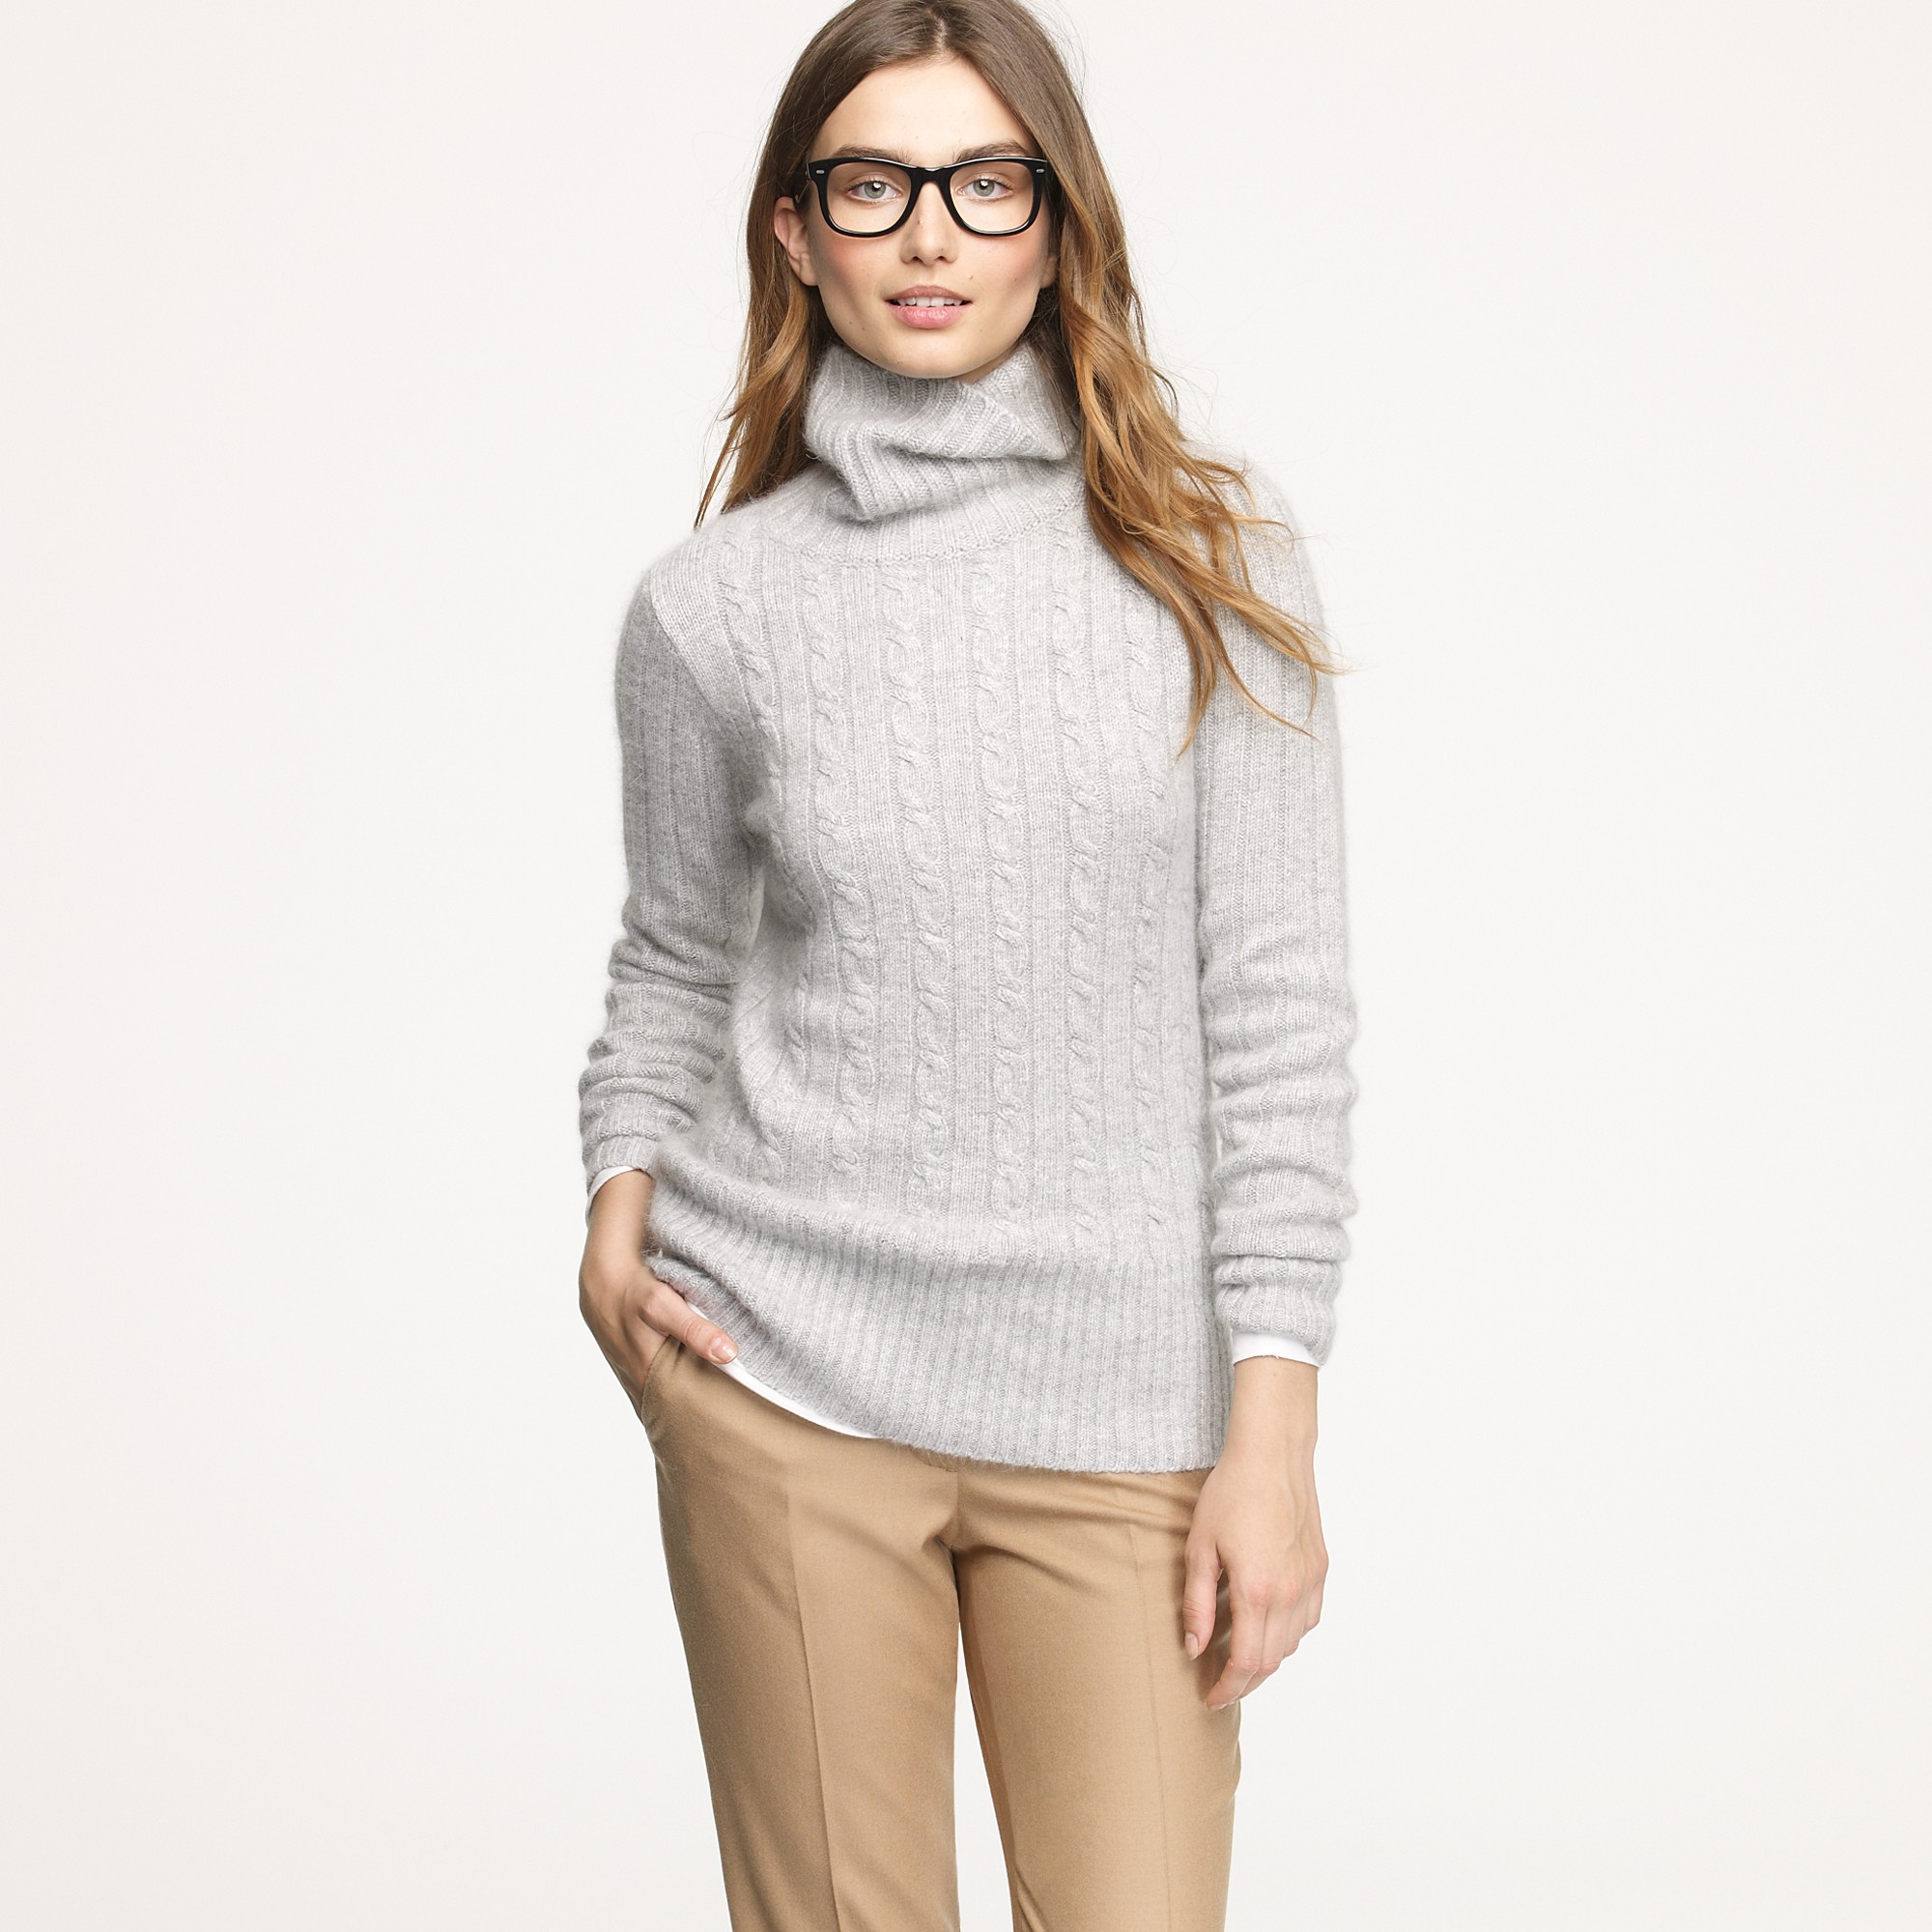 Lyst - J.Crew Cambridge Cable Chunky Turtleneck Sweater in Gray